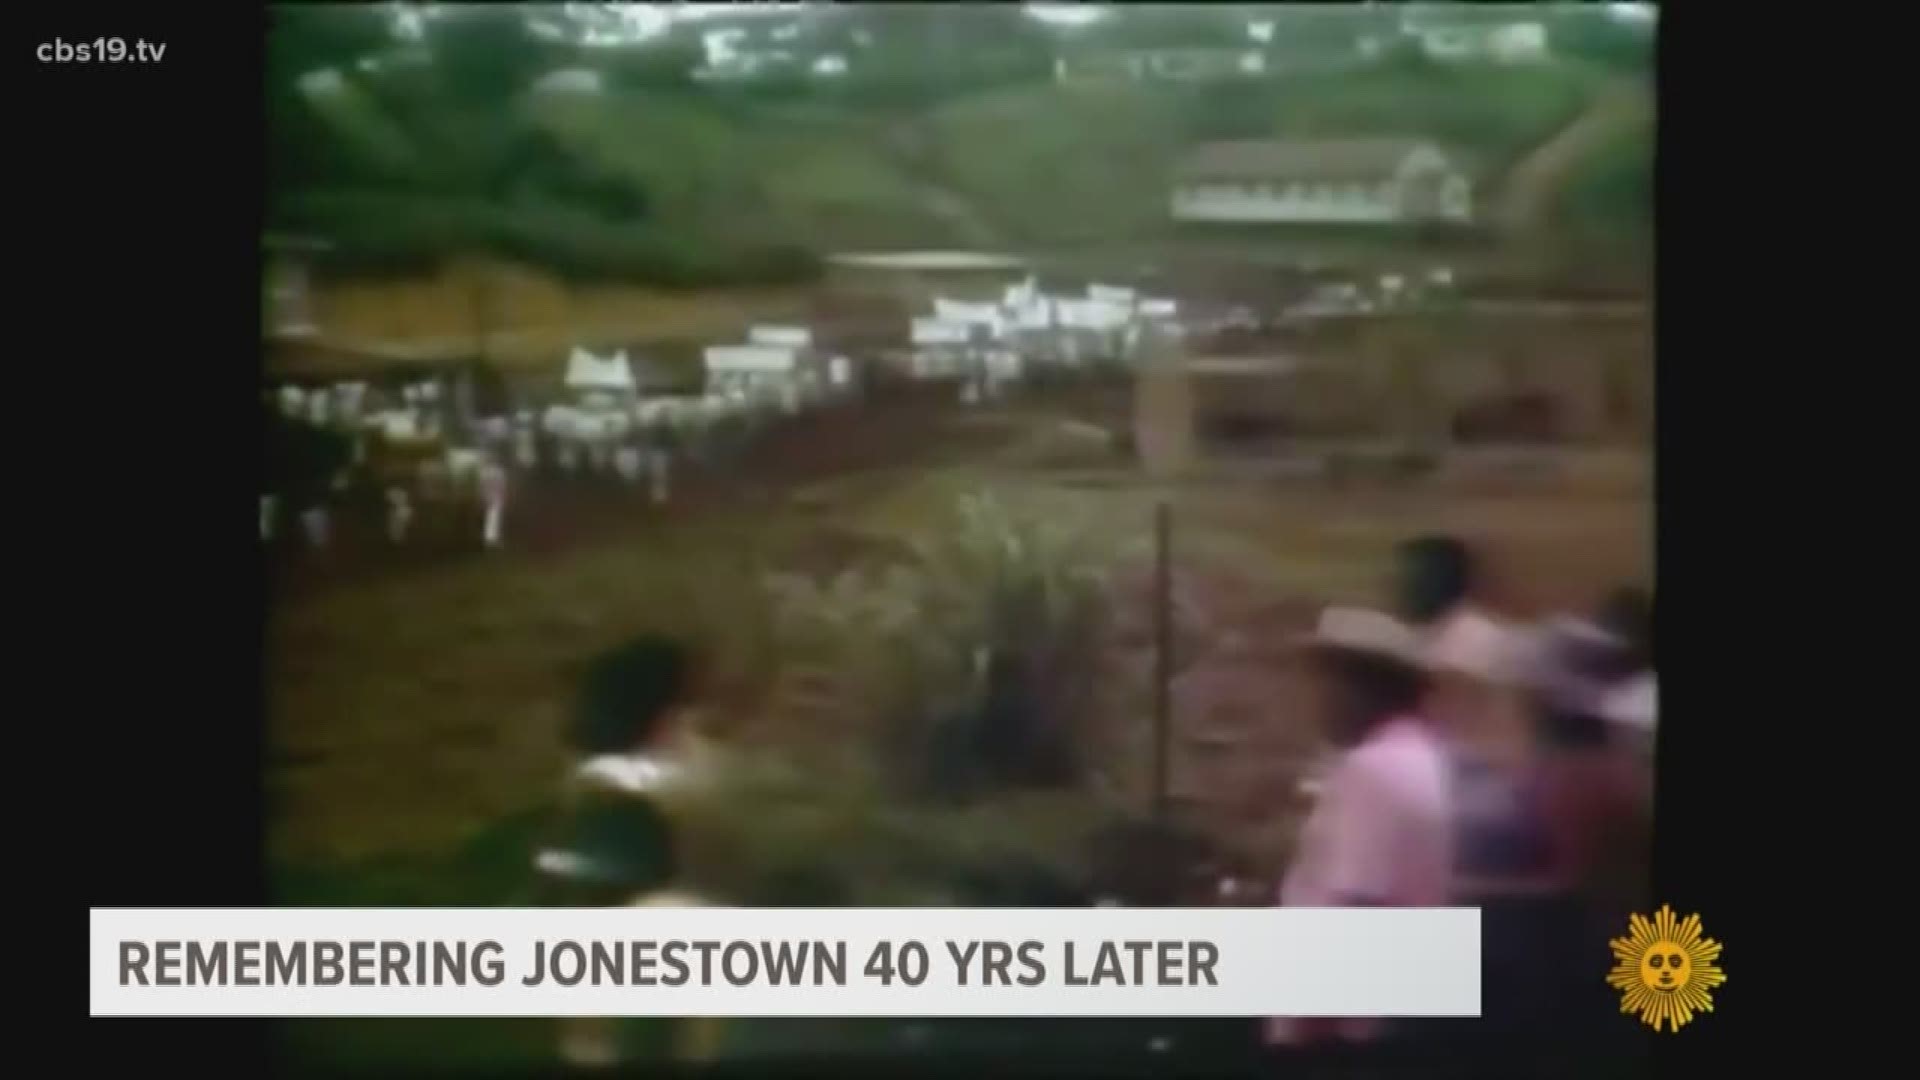 It's been 40 year since more than 900 people died at Jonestown.